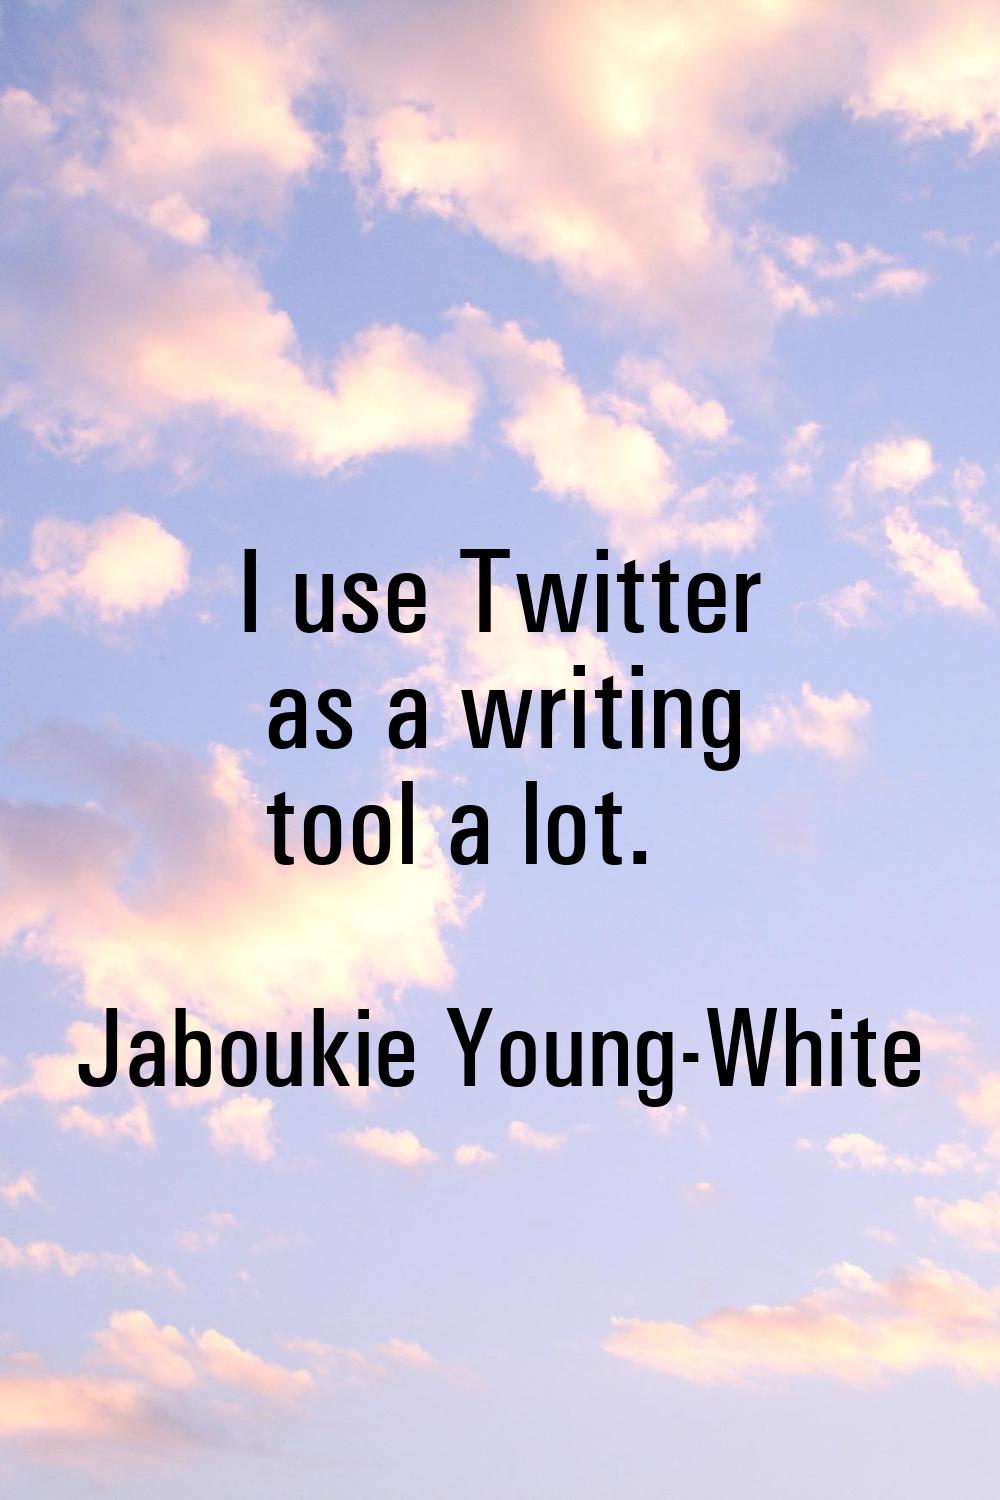 I use Twitter as a writing tool a lot.